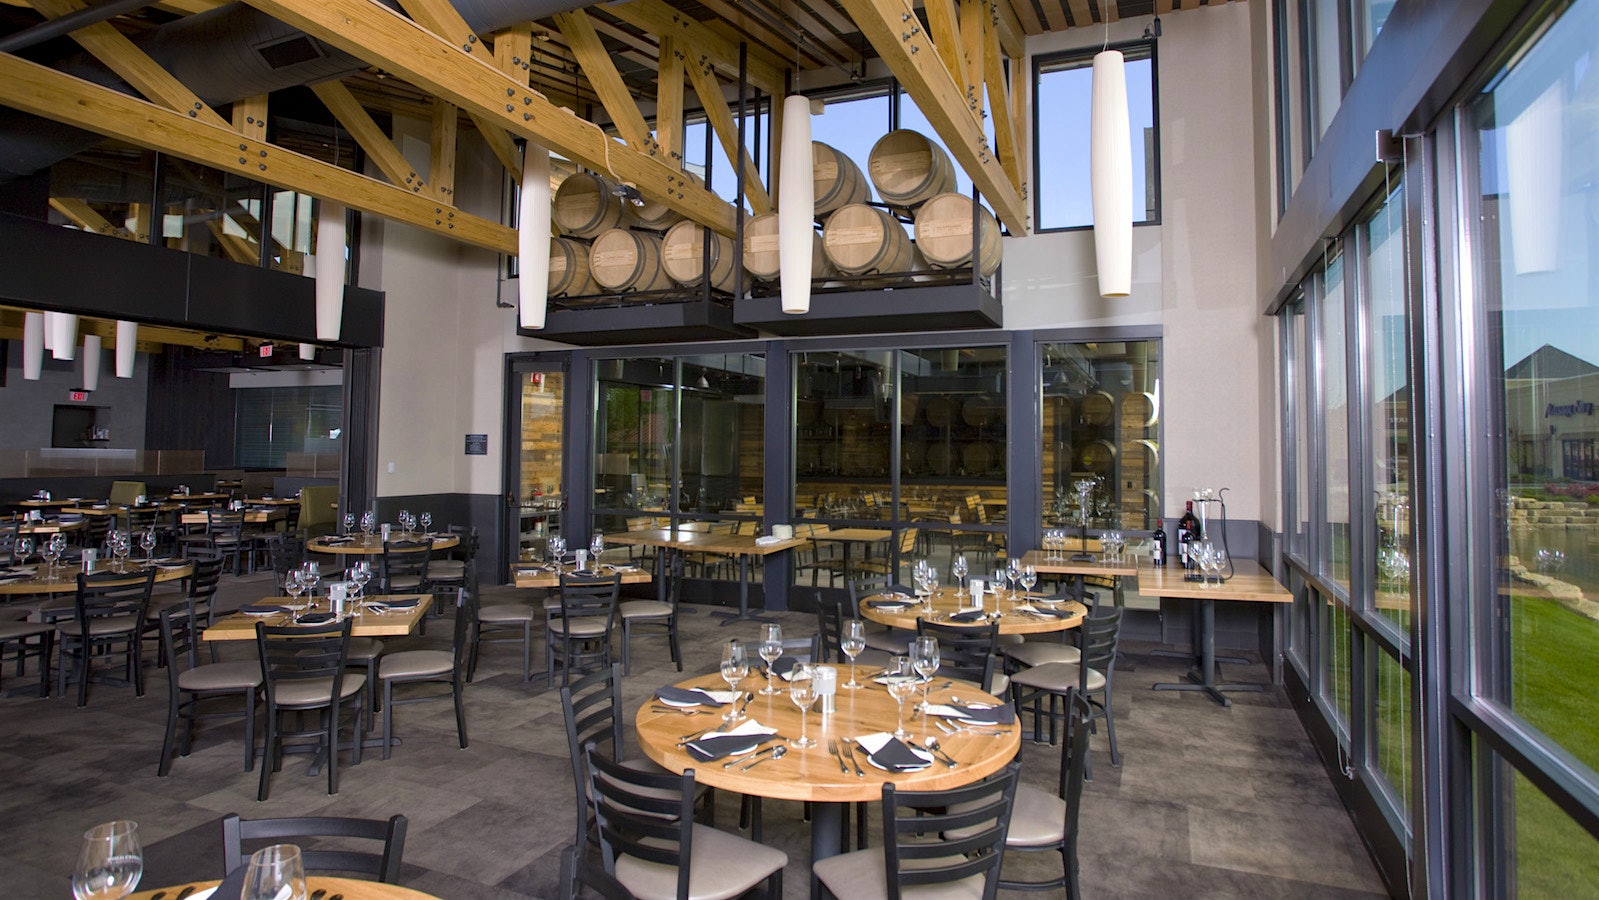  Interior of Cooper's Hawk winery and restaurant in Cline, Iowa, with dining tables, a floor-to-ceiling window, visible rafters and a glassed-in wine barrel room